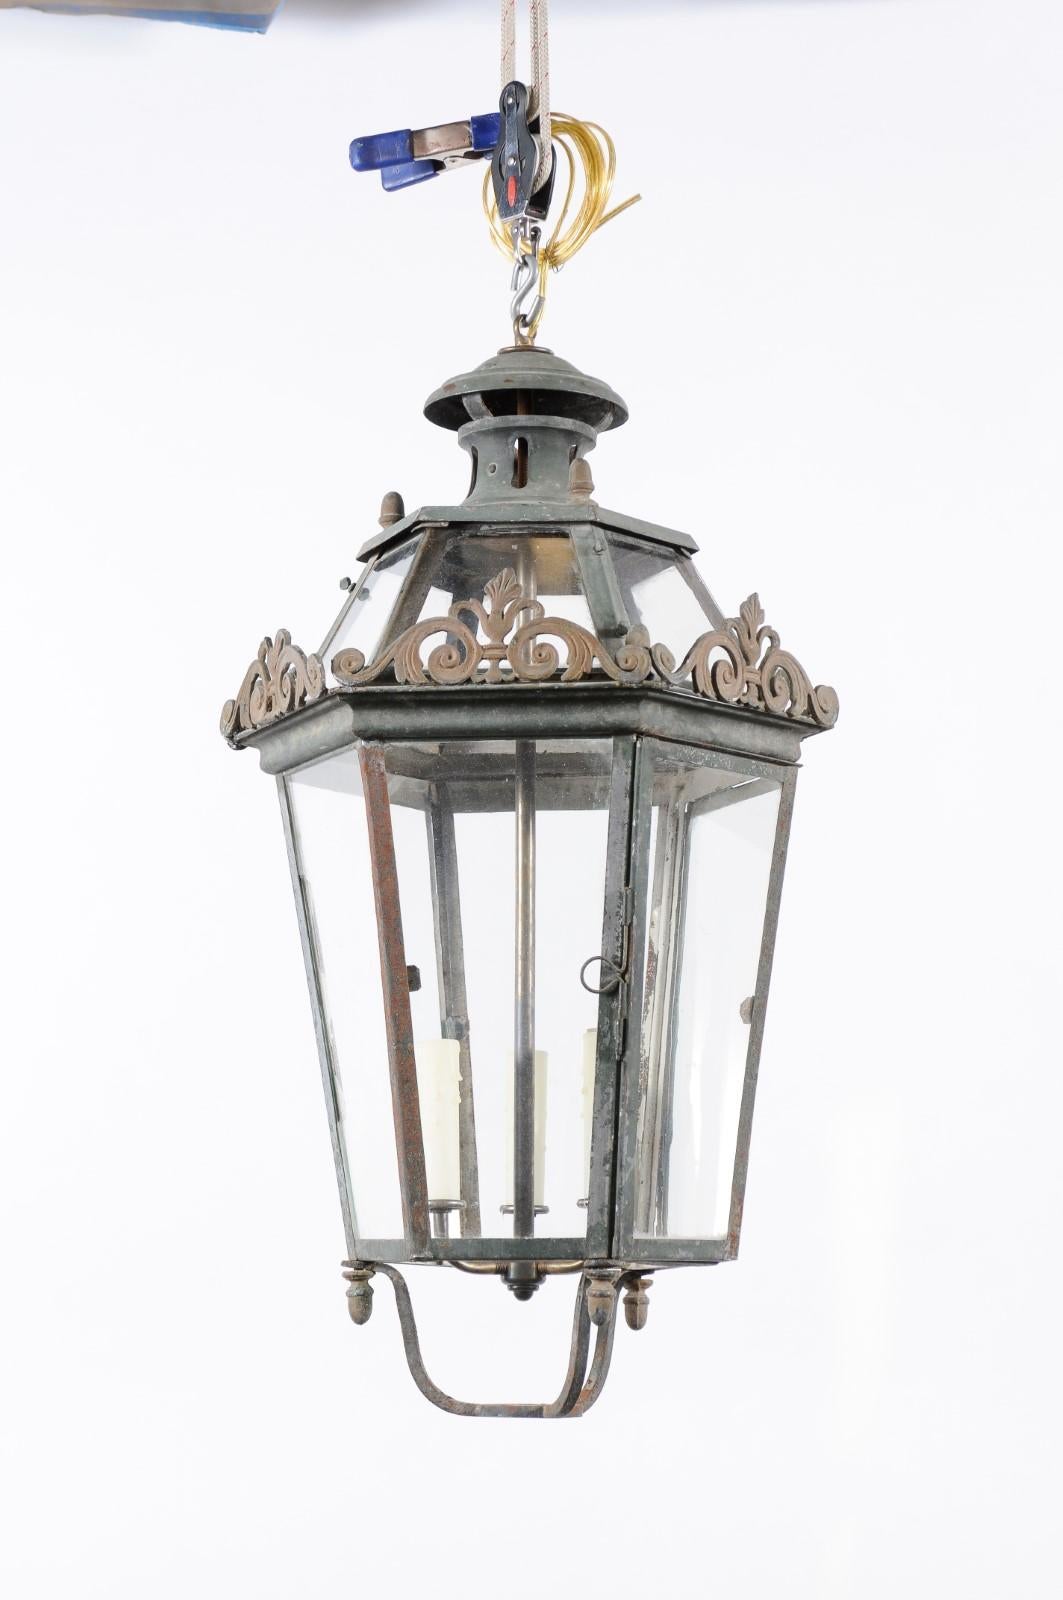  Venetian Painted Iron Street Lantern with 3 Lights, Late 19th Century For Sale 3